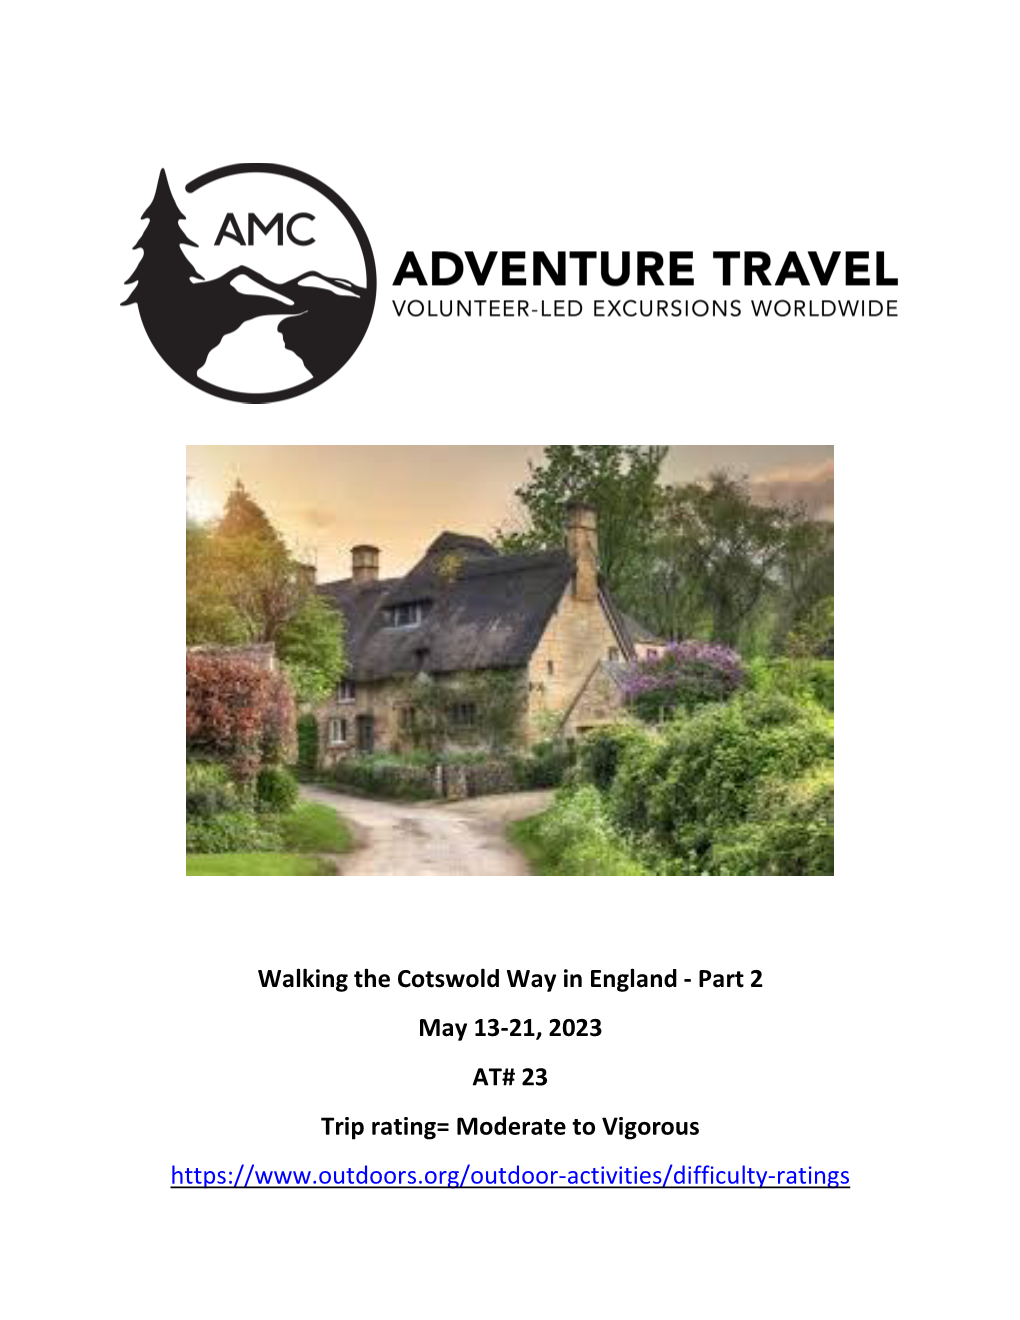 Walking the Cotswold Way in England - Part 2 May 13-21, 2023 AT# 23 Trip Rating= Moderate to Vigorous